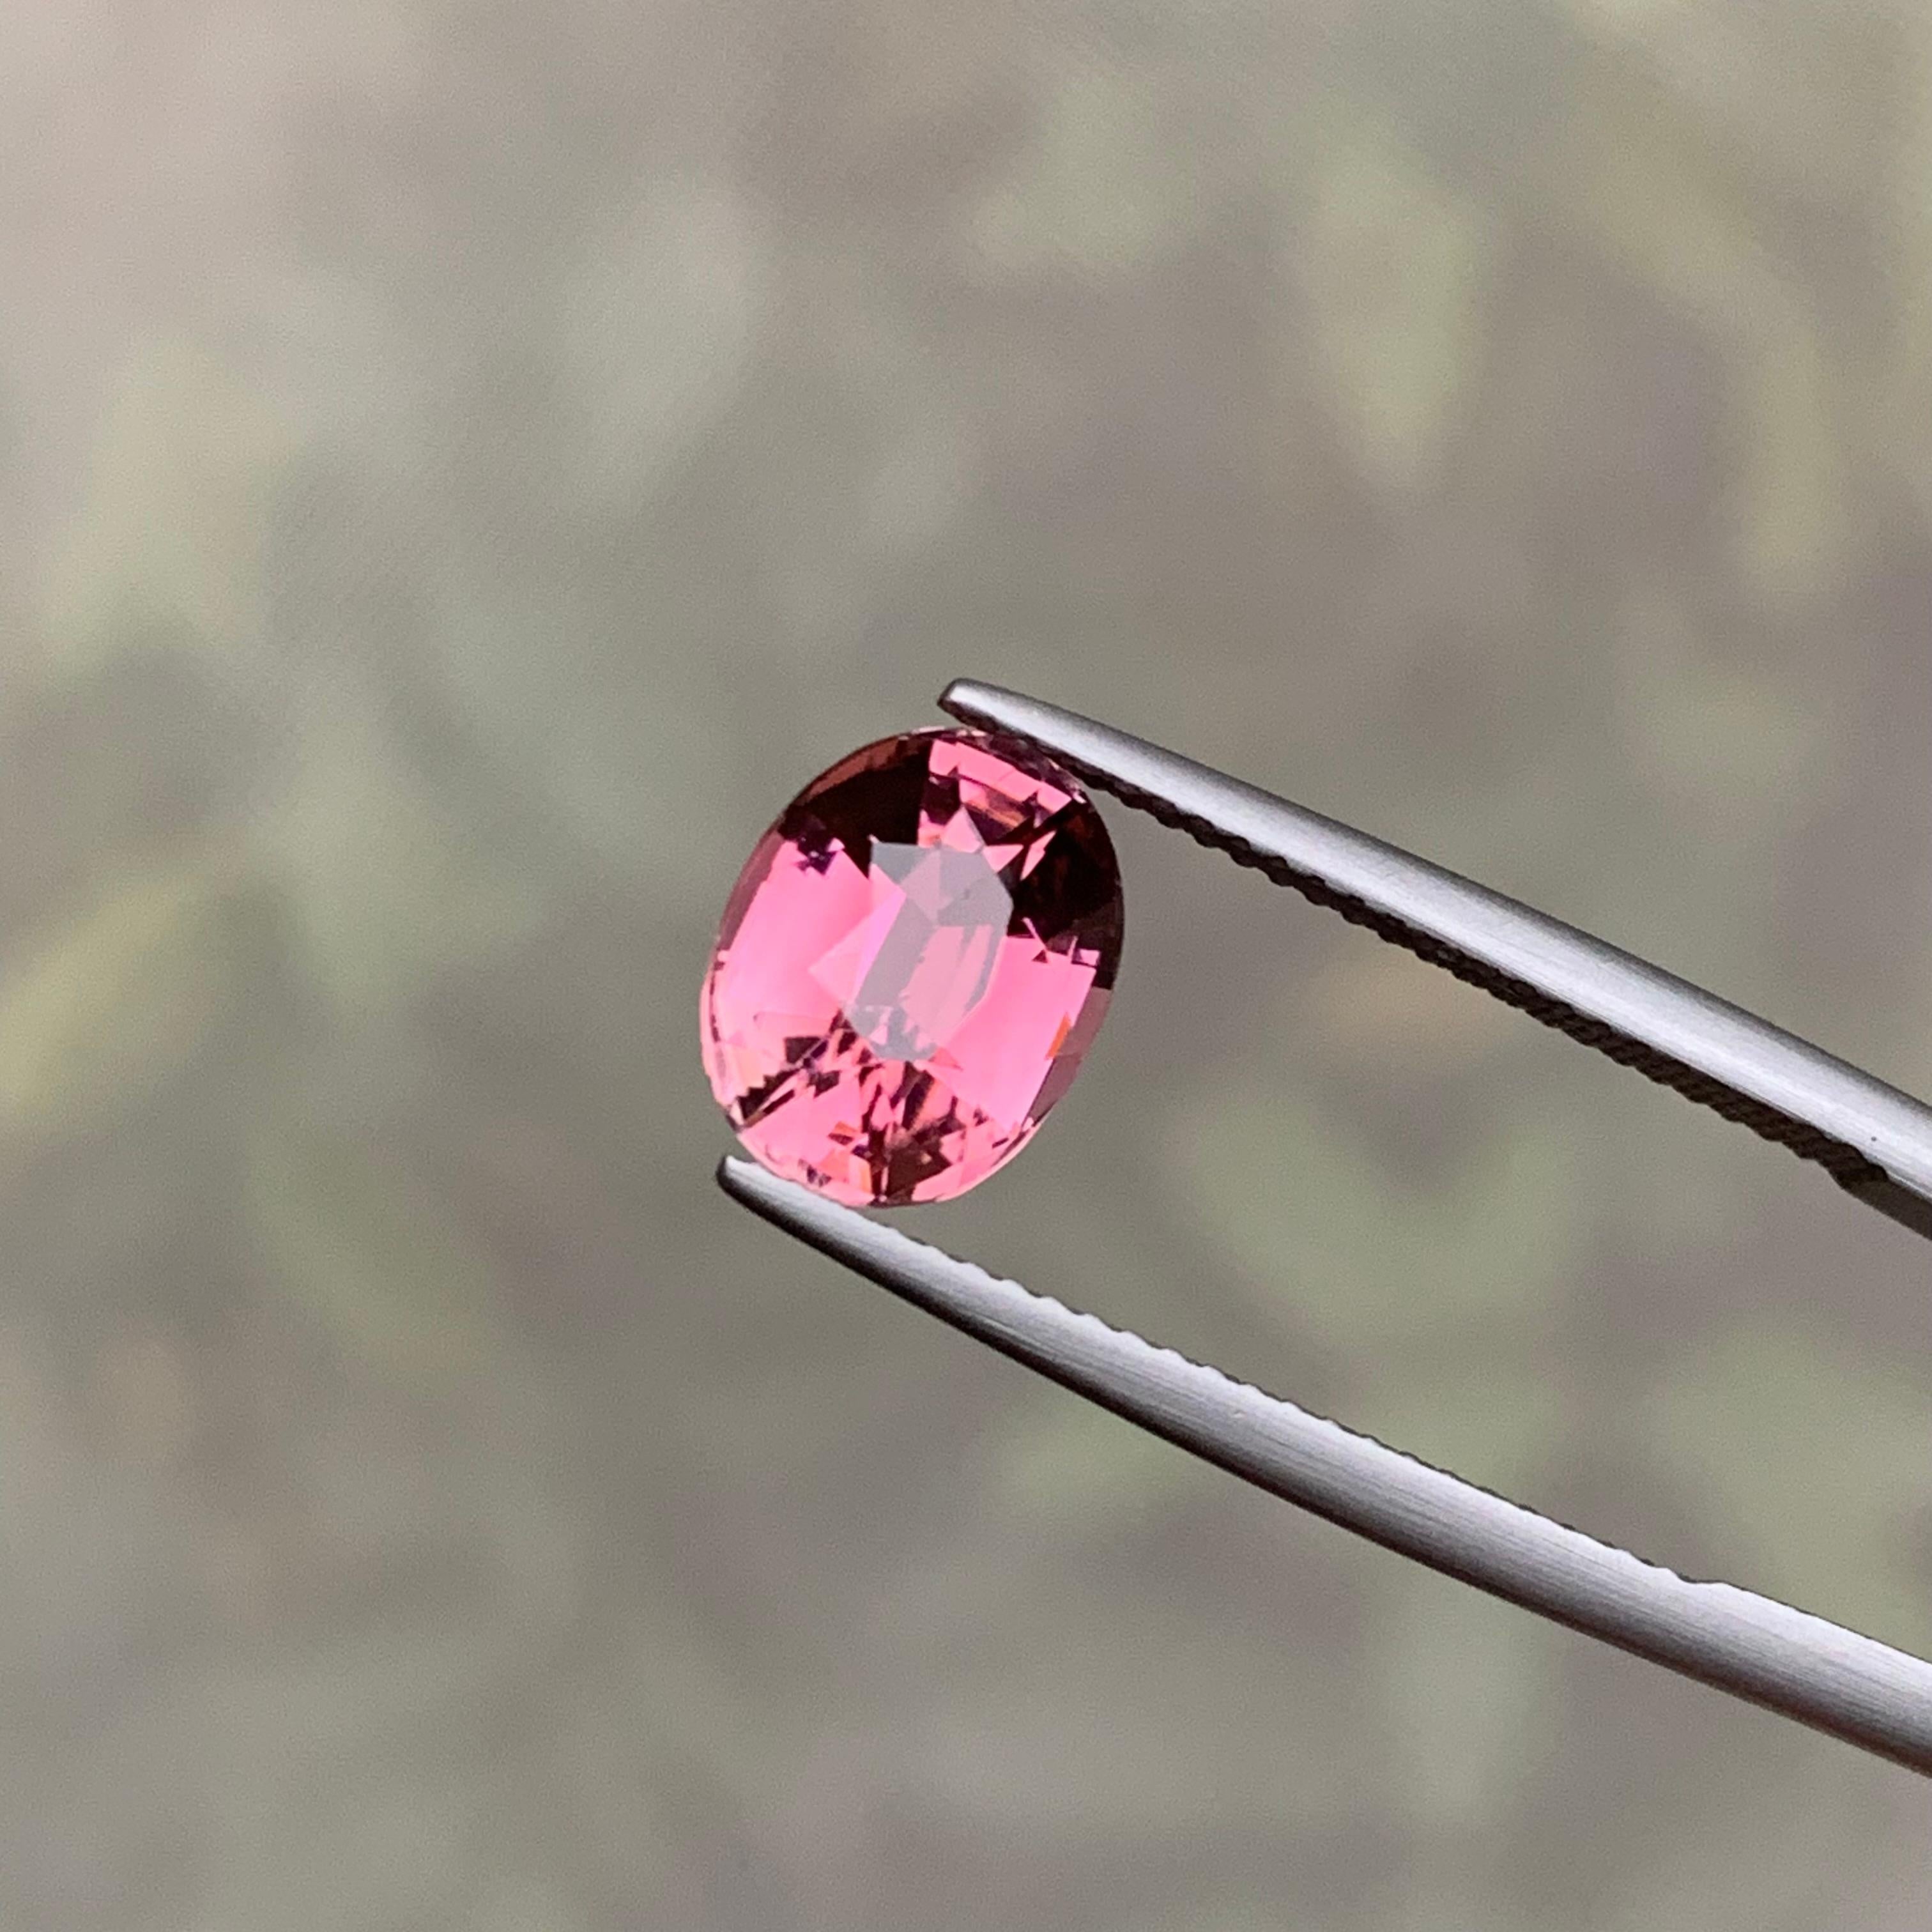 Rare Pink Natural Afghan Tourmaline Loose Gemstone, 2.75 Ct-Cushion Cut for ring For Sale 1